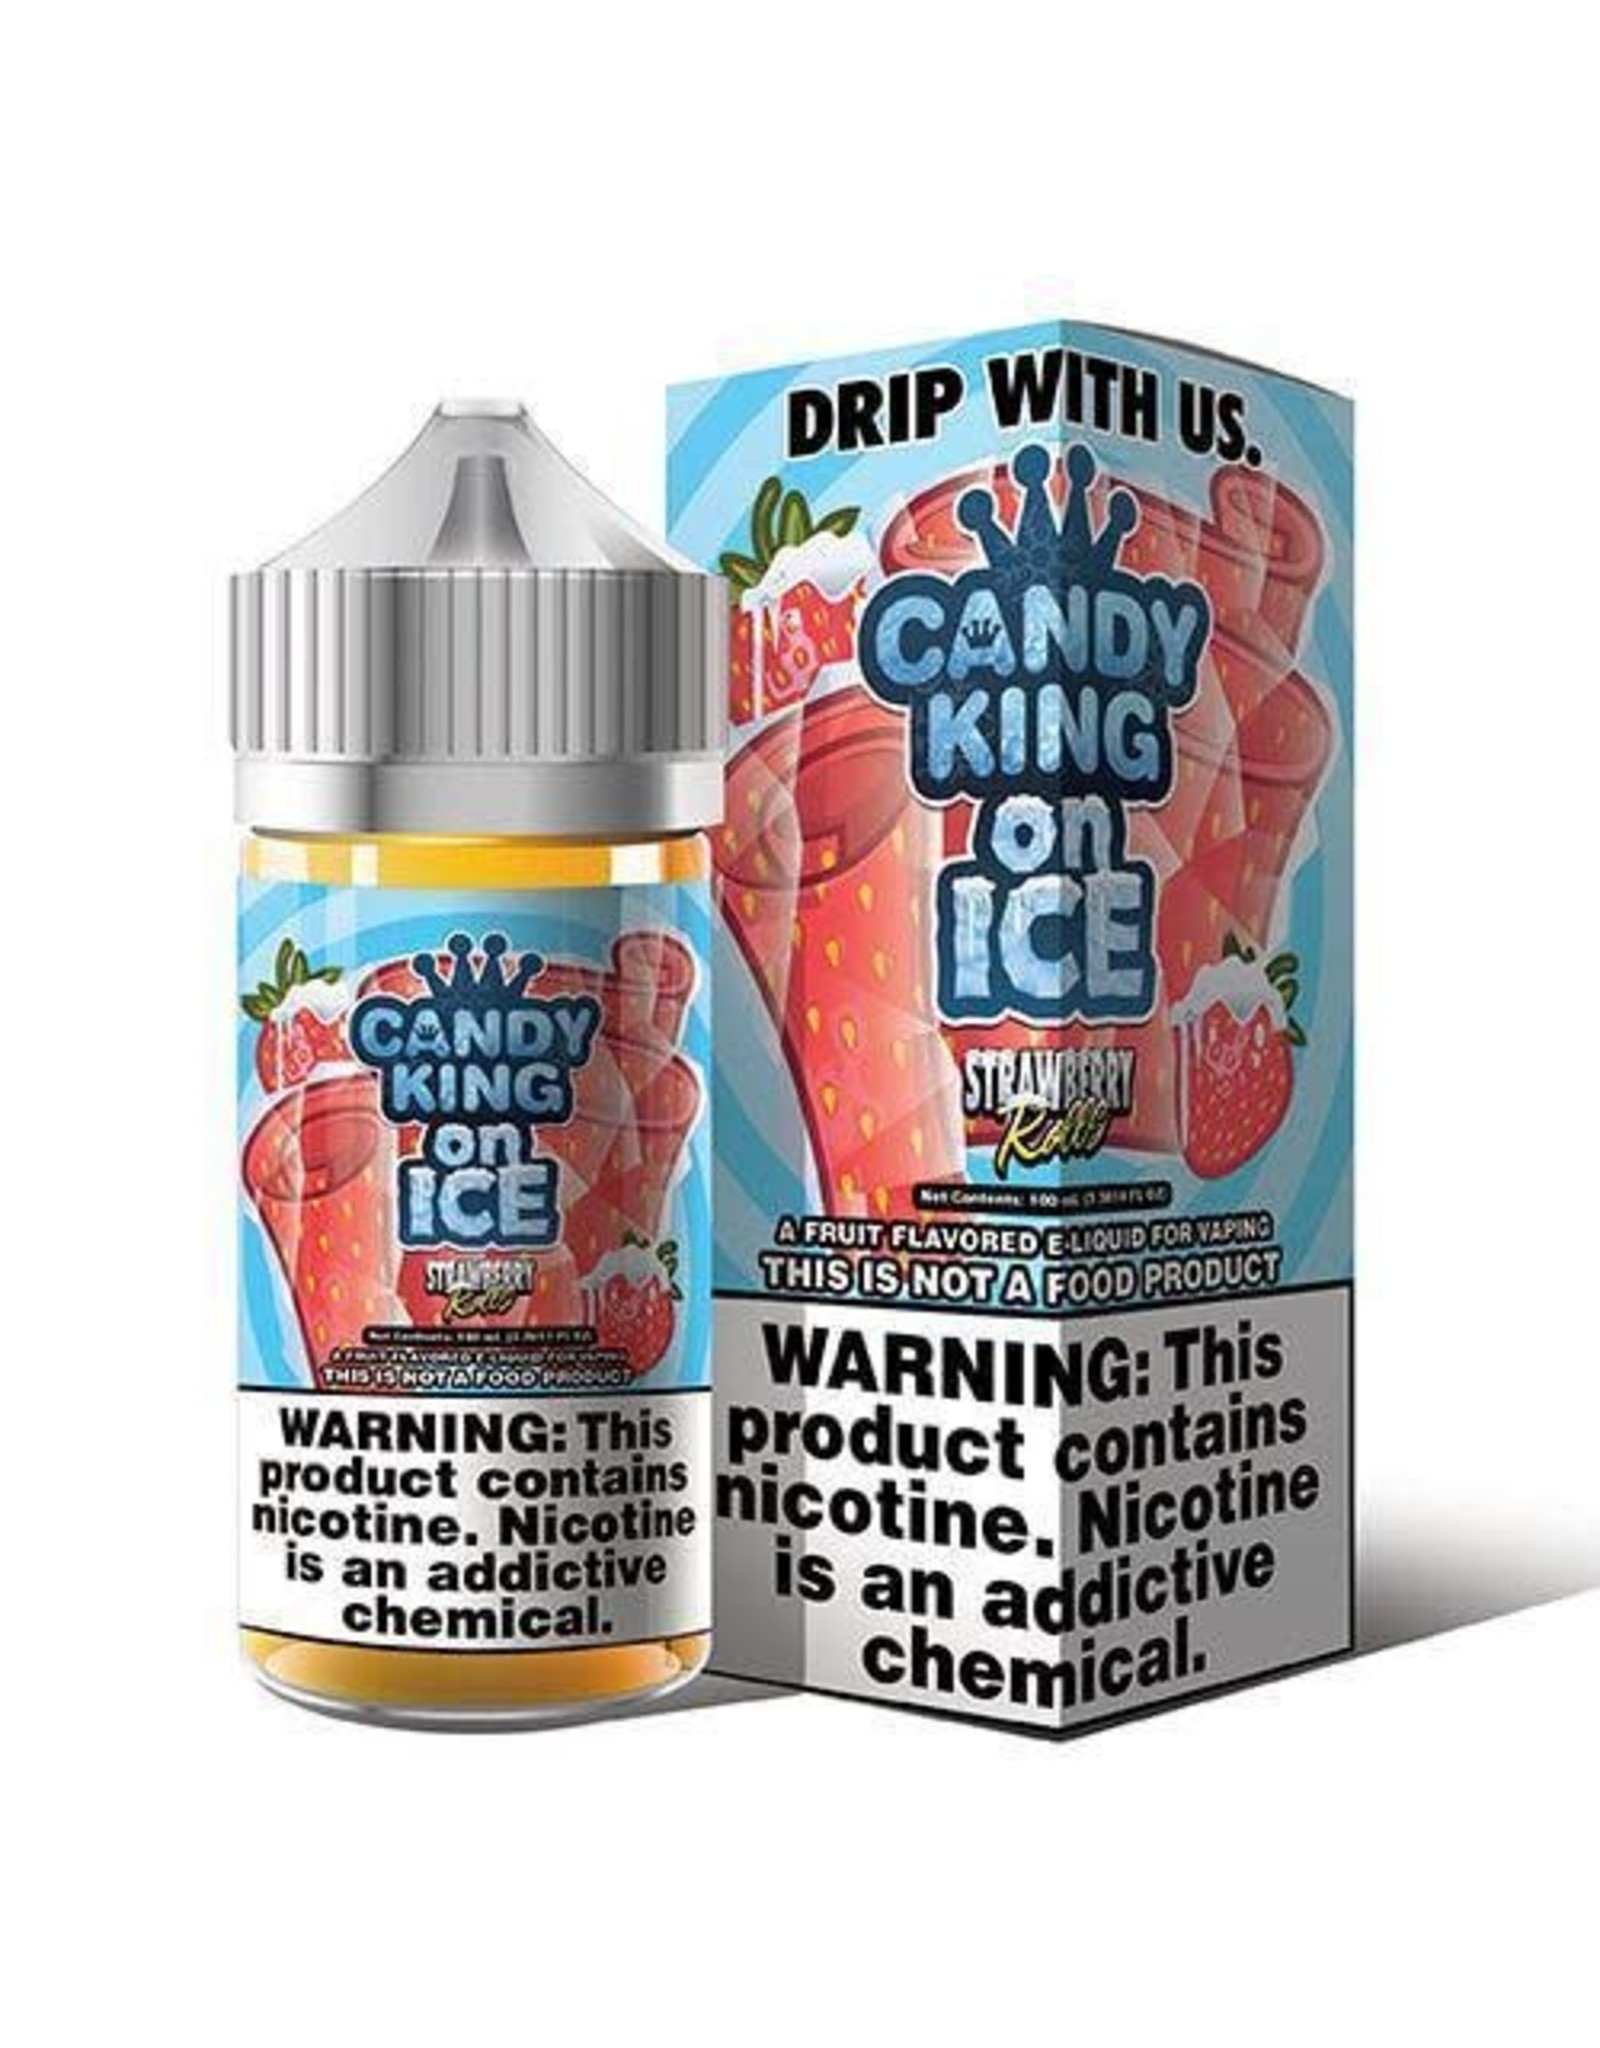 Candy King Candy King eJuice